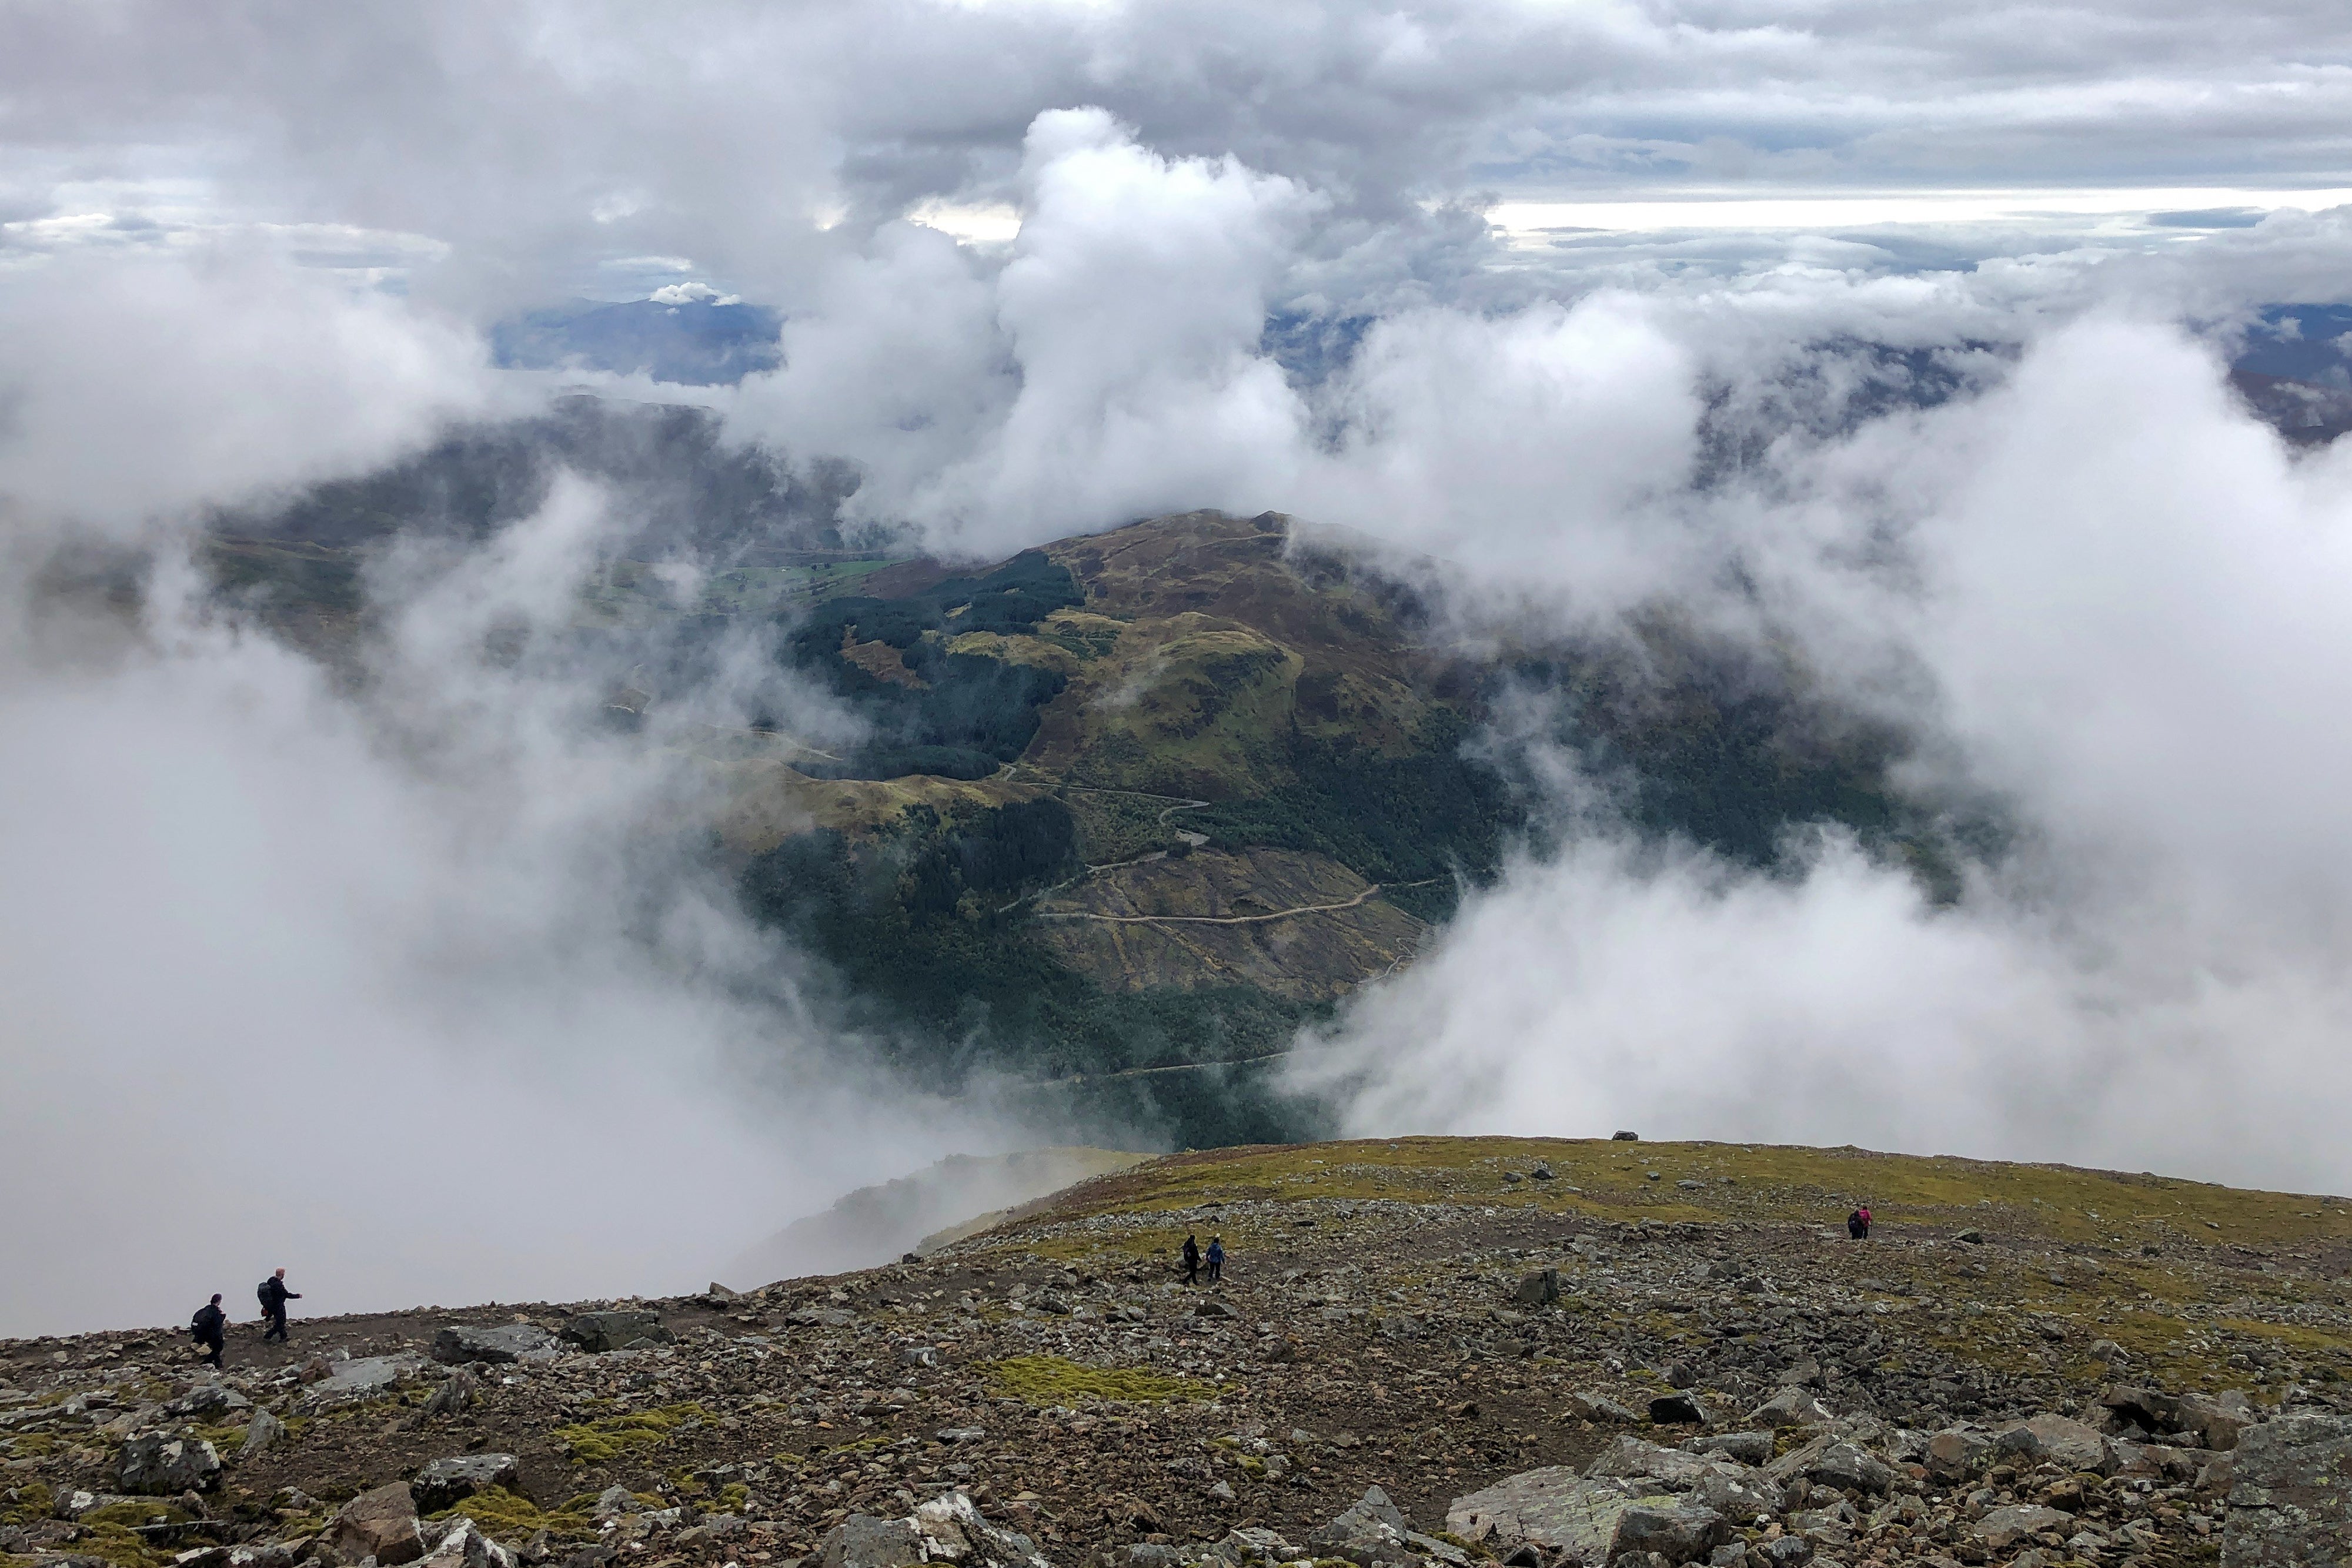 A view down to Glen Nevis from the ascent of Ben Nevis in Scotland